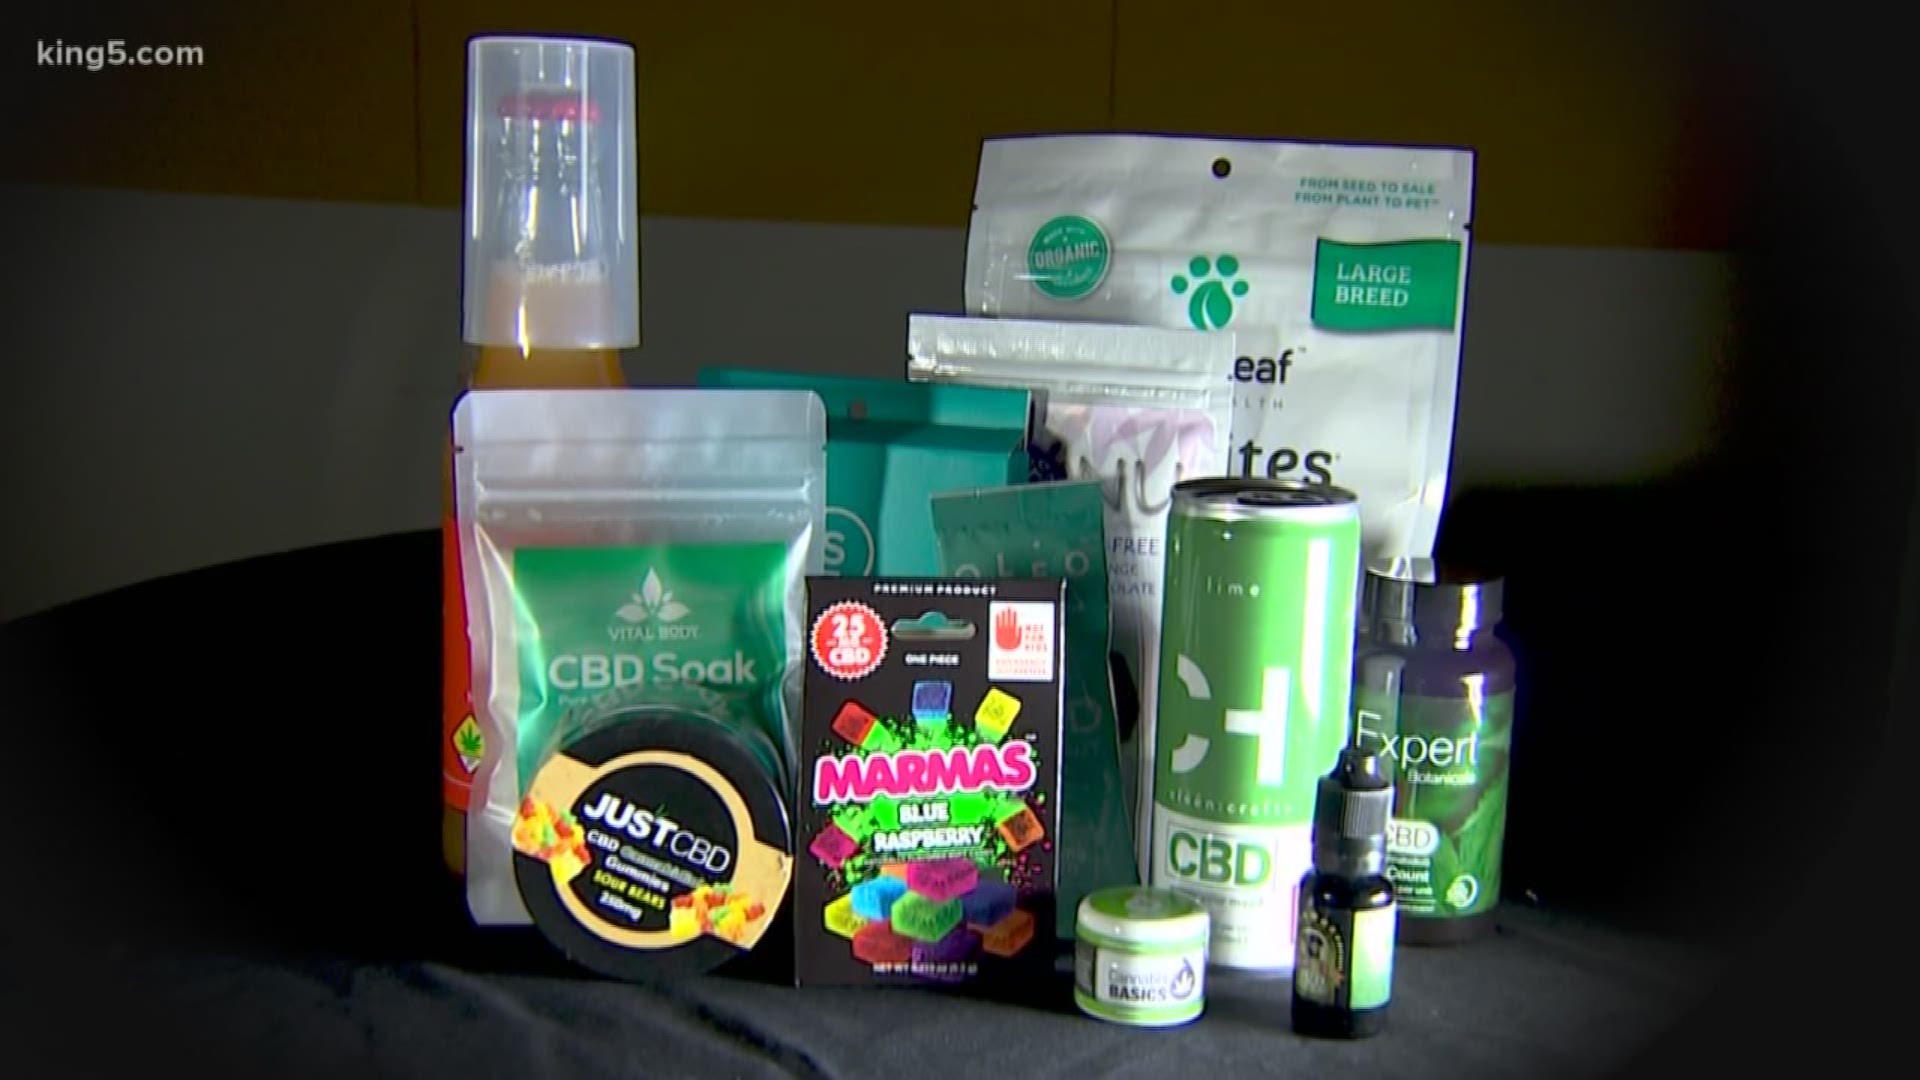 A KING 5 test puts the contents of many CBD products in dispute.